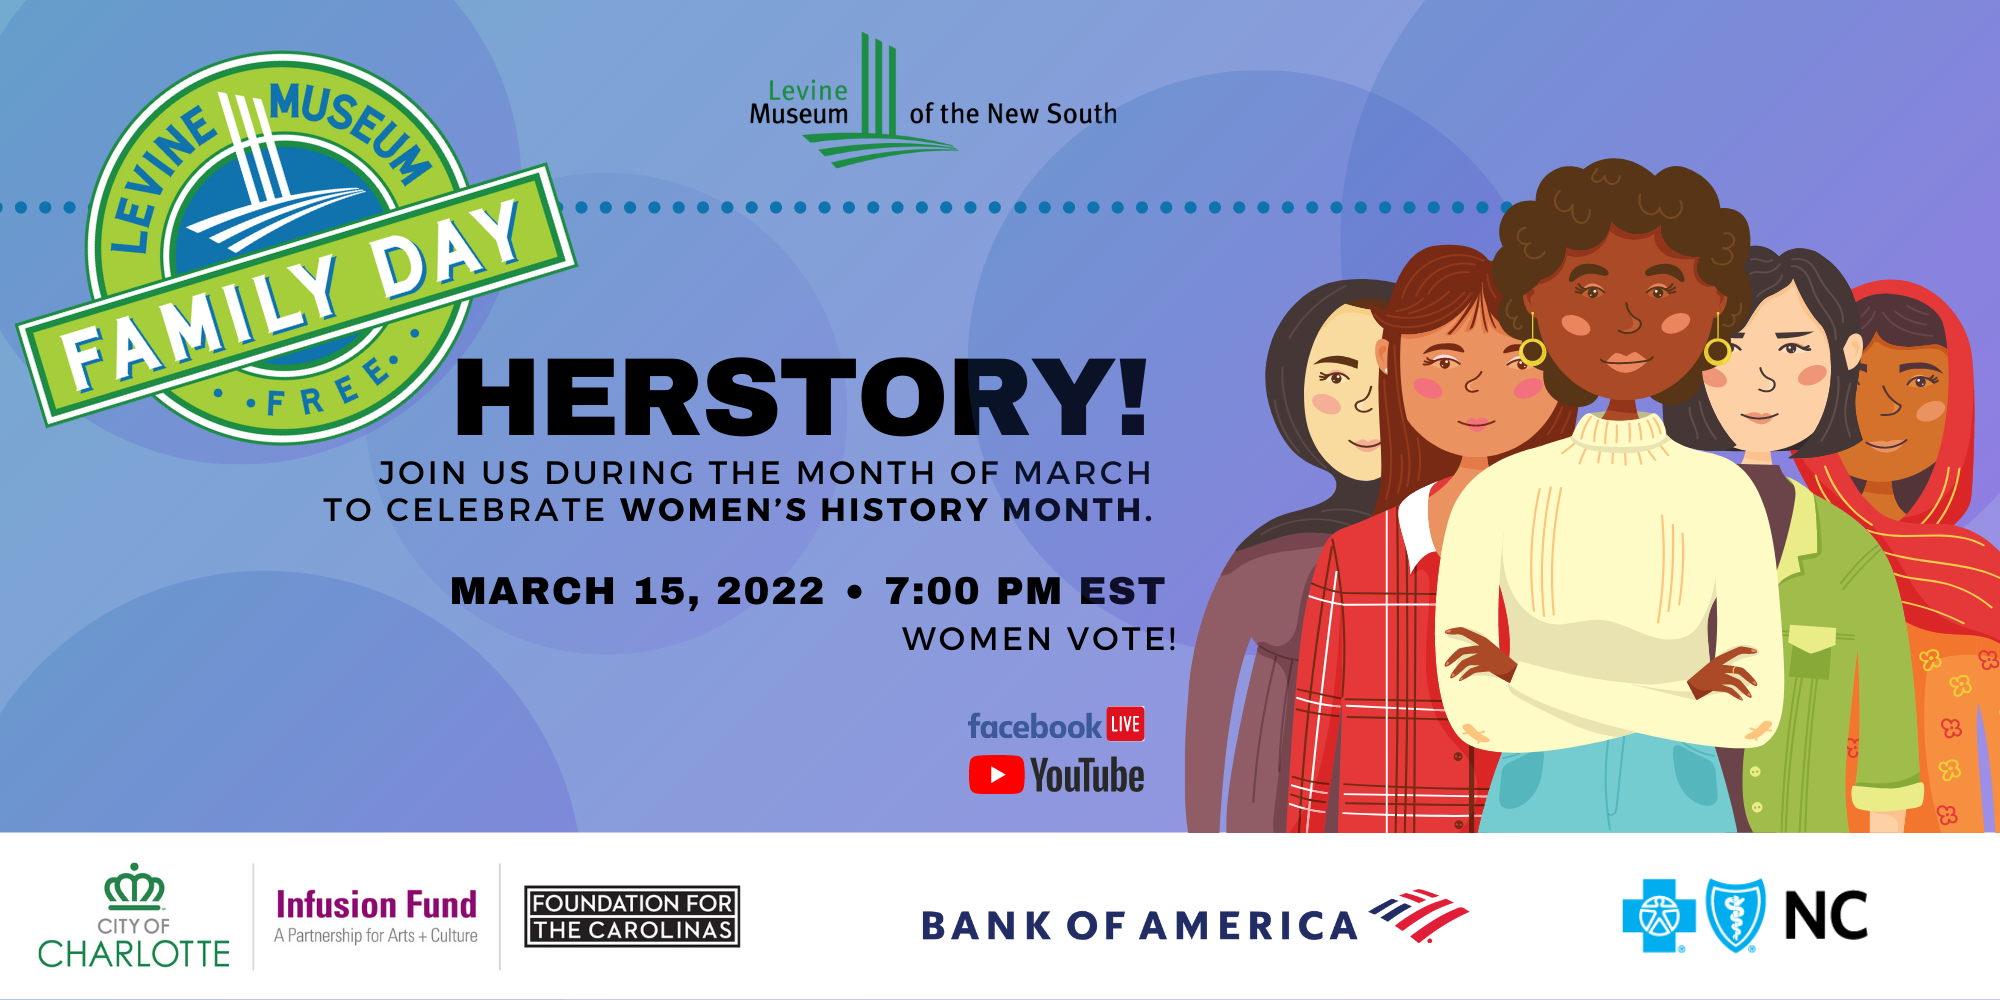 Levine Museum of the New South HERstory: Virtual Family Day Celebration Women Vote Event Image